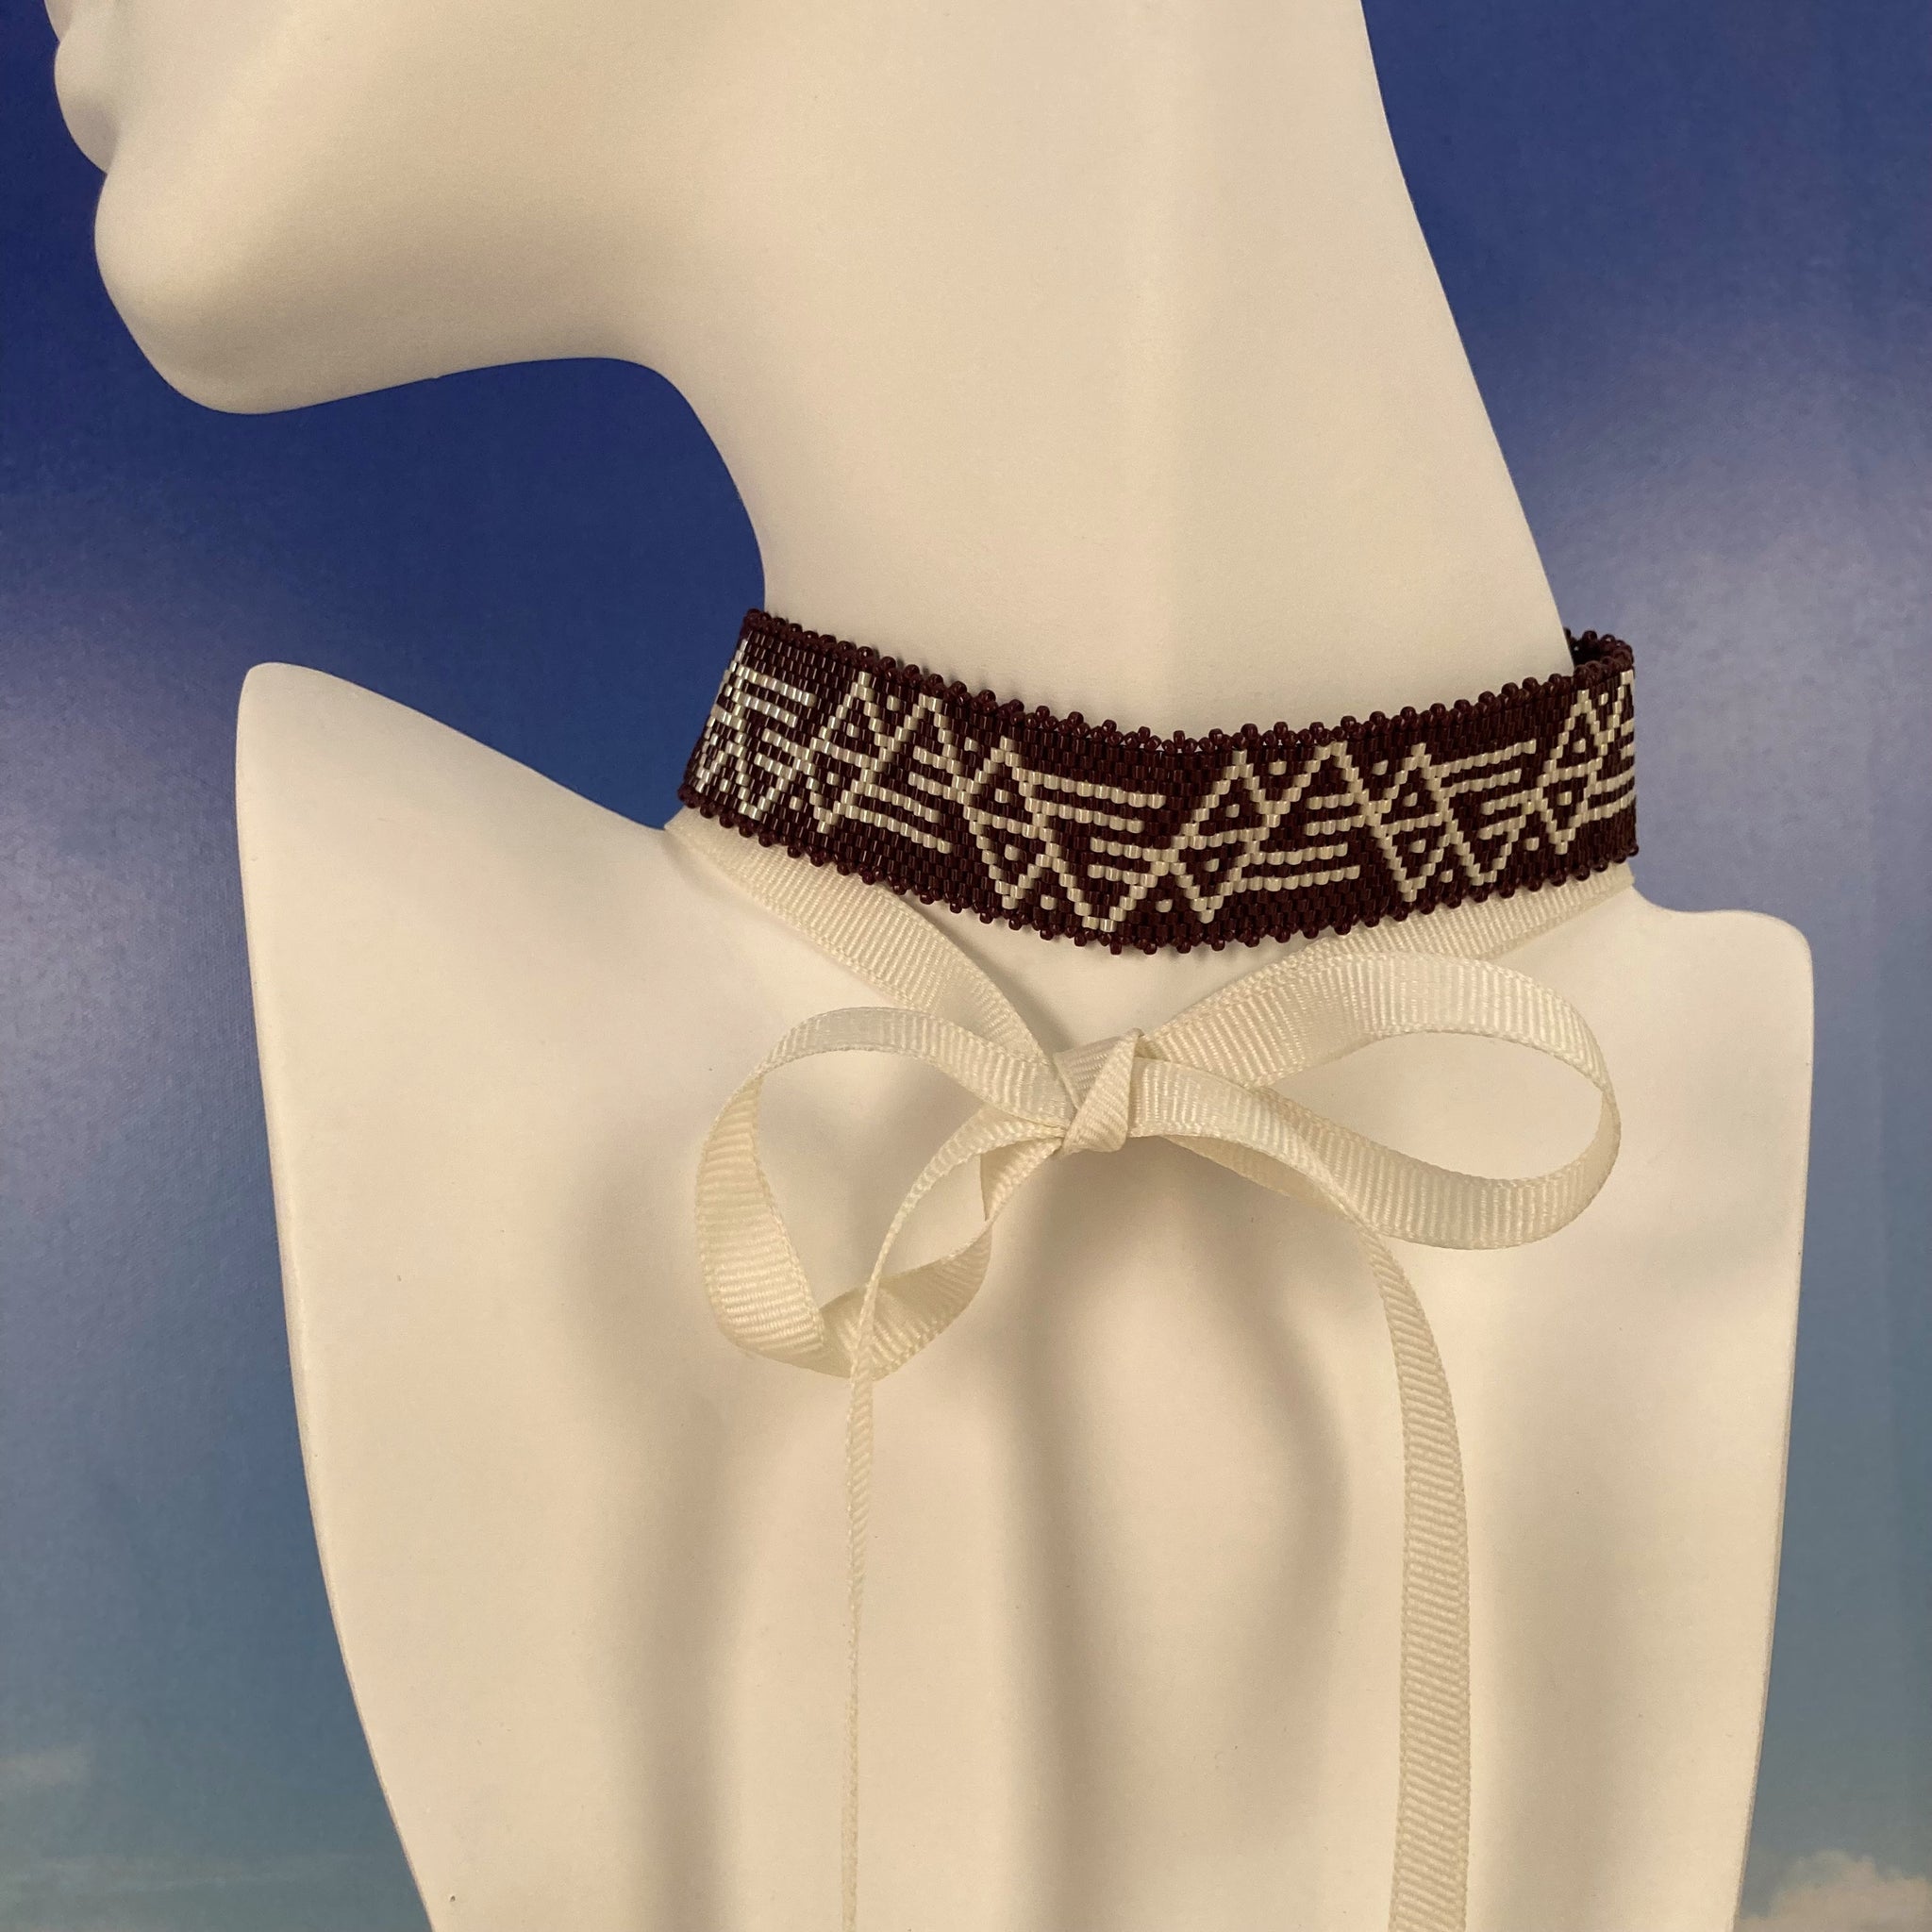 Beaded Choker Mudcloth Design in Brown and Cream Beige